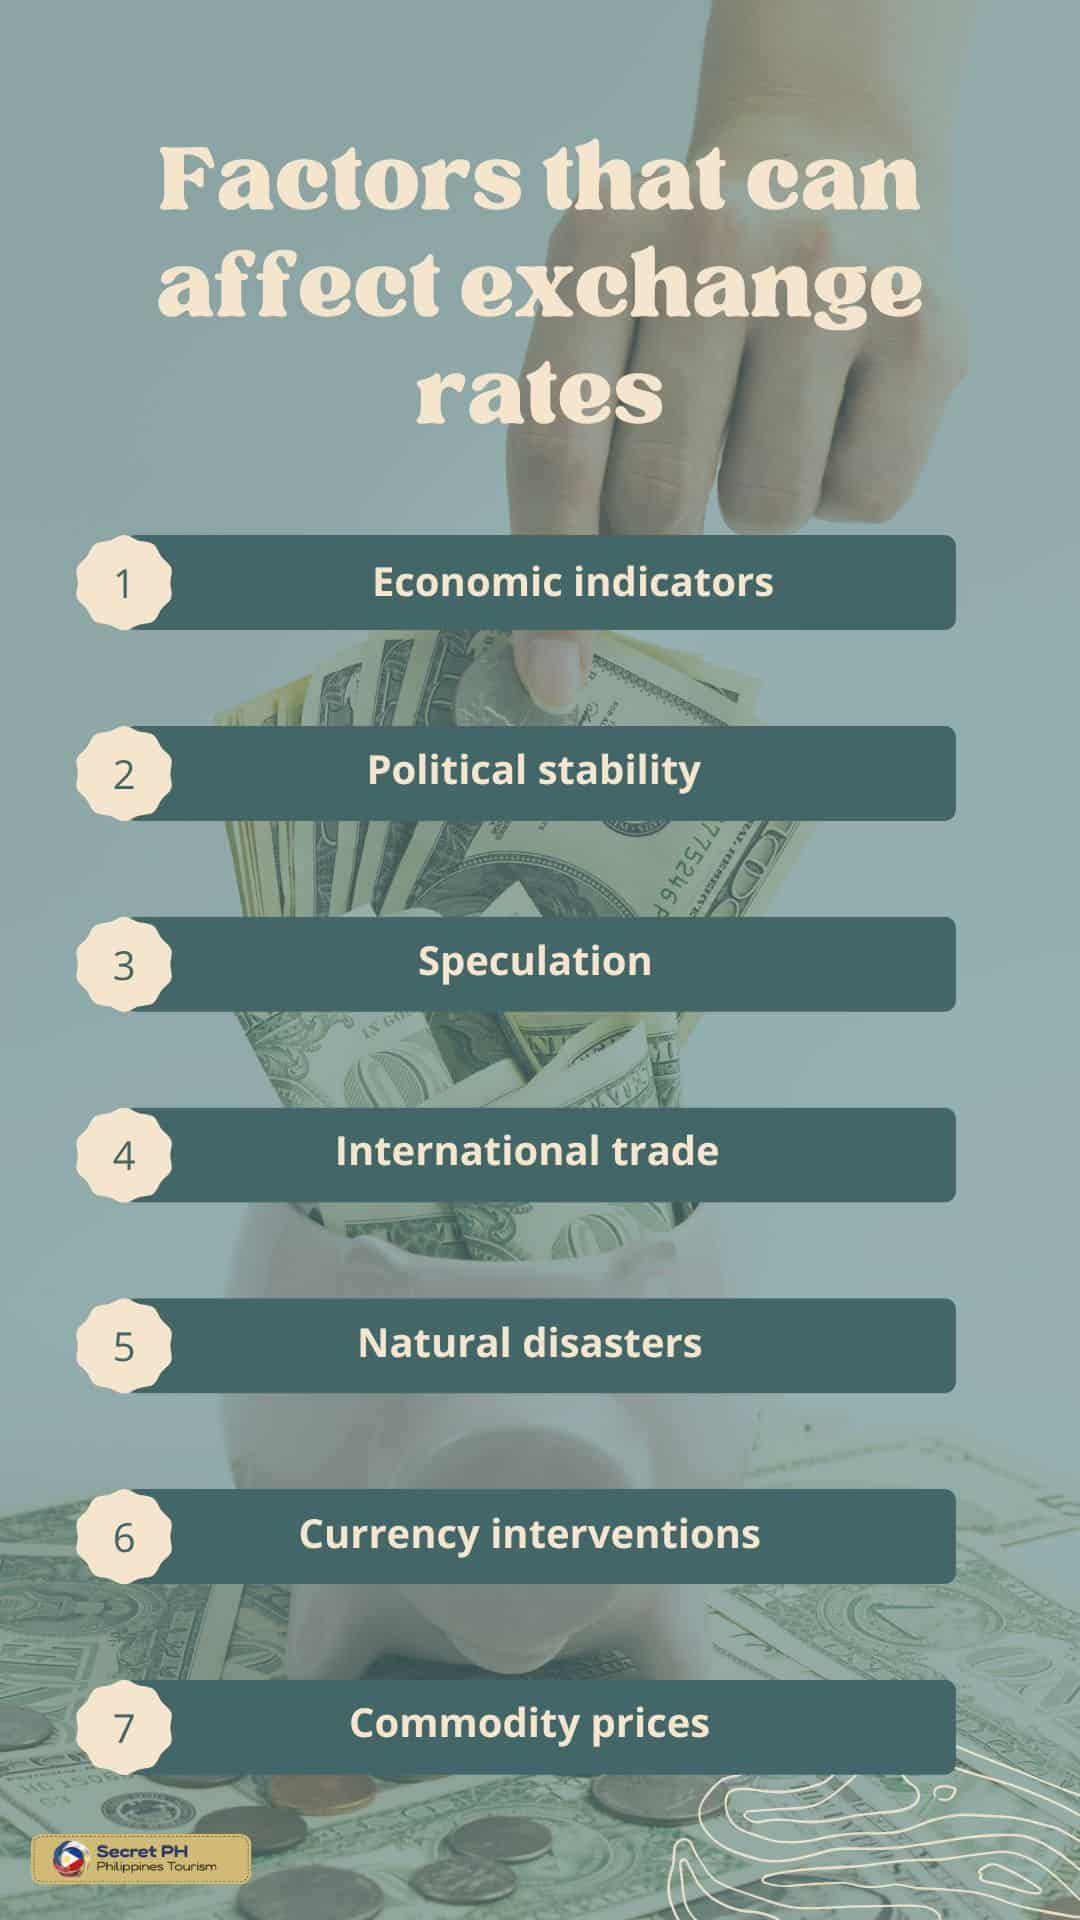 Factors that can affect exchange rates